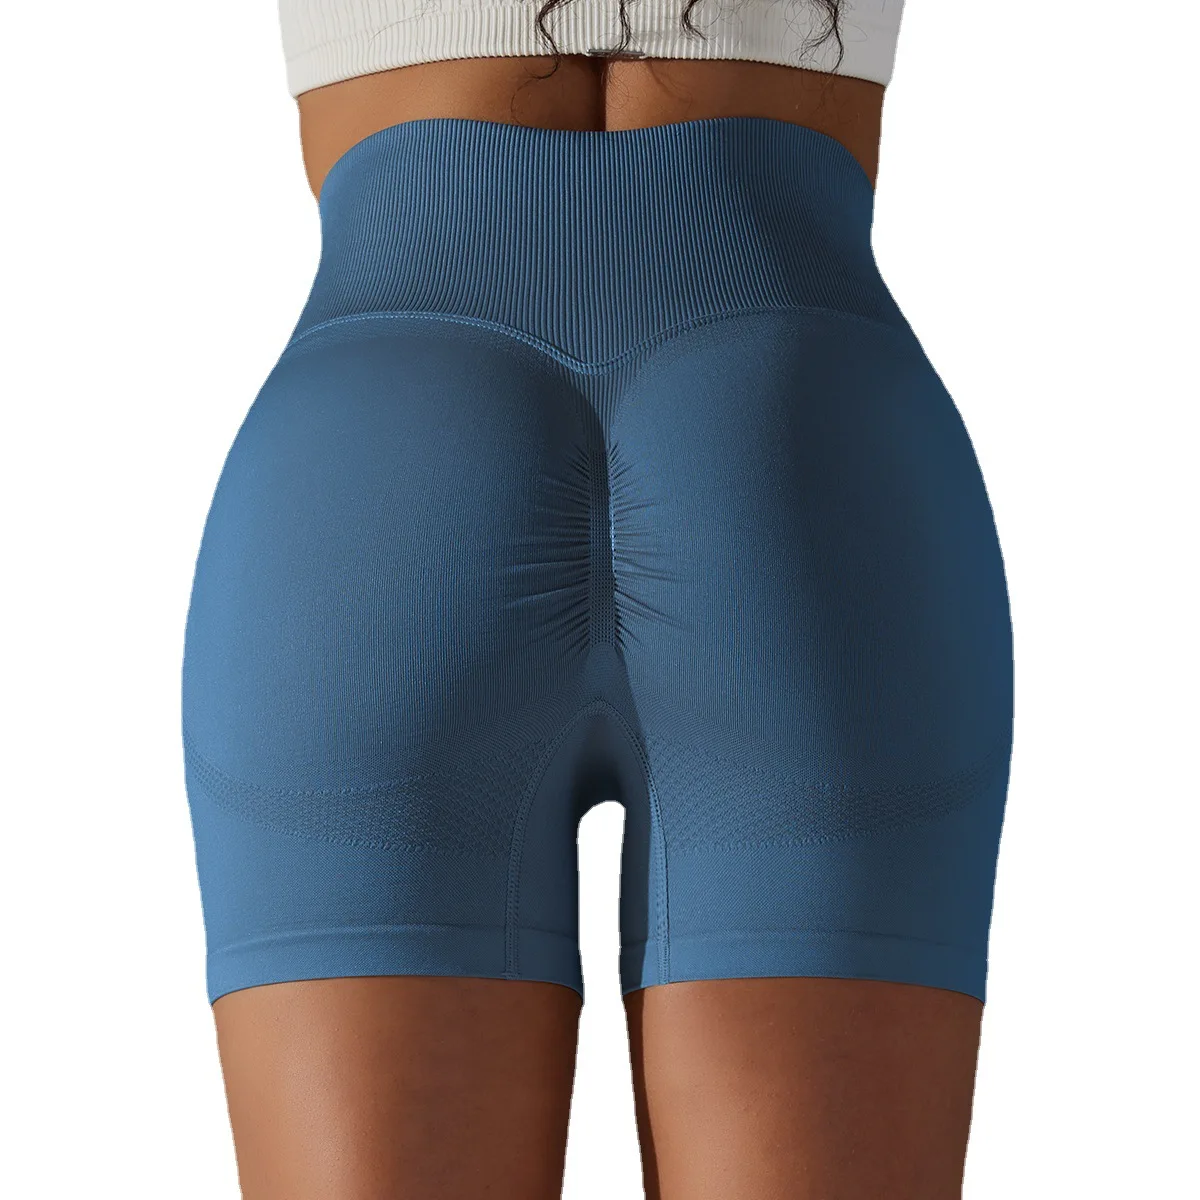 Lulu High quality seamless belly tuck jacquard peach butt high spring belly tuck Yoga casual sports running fitness shorts women